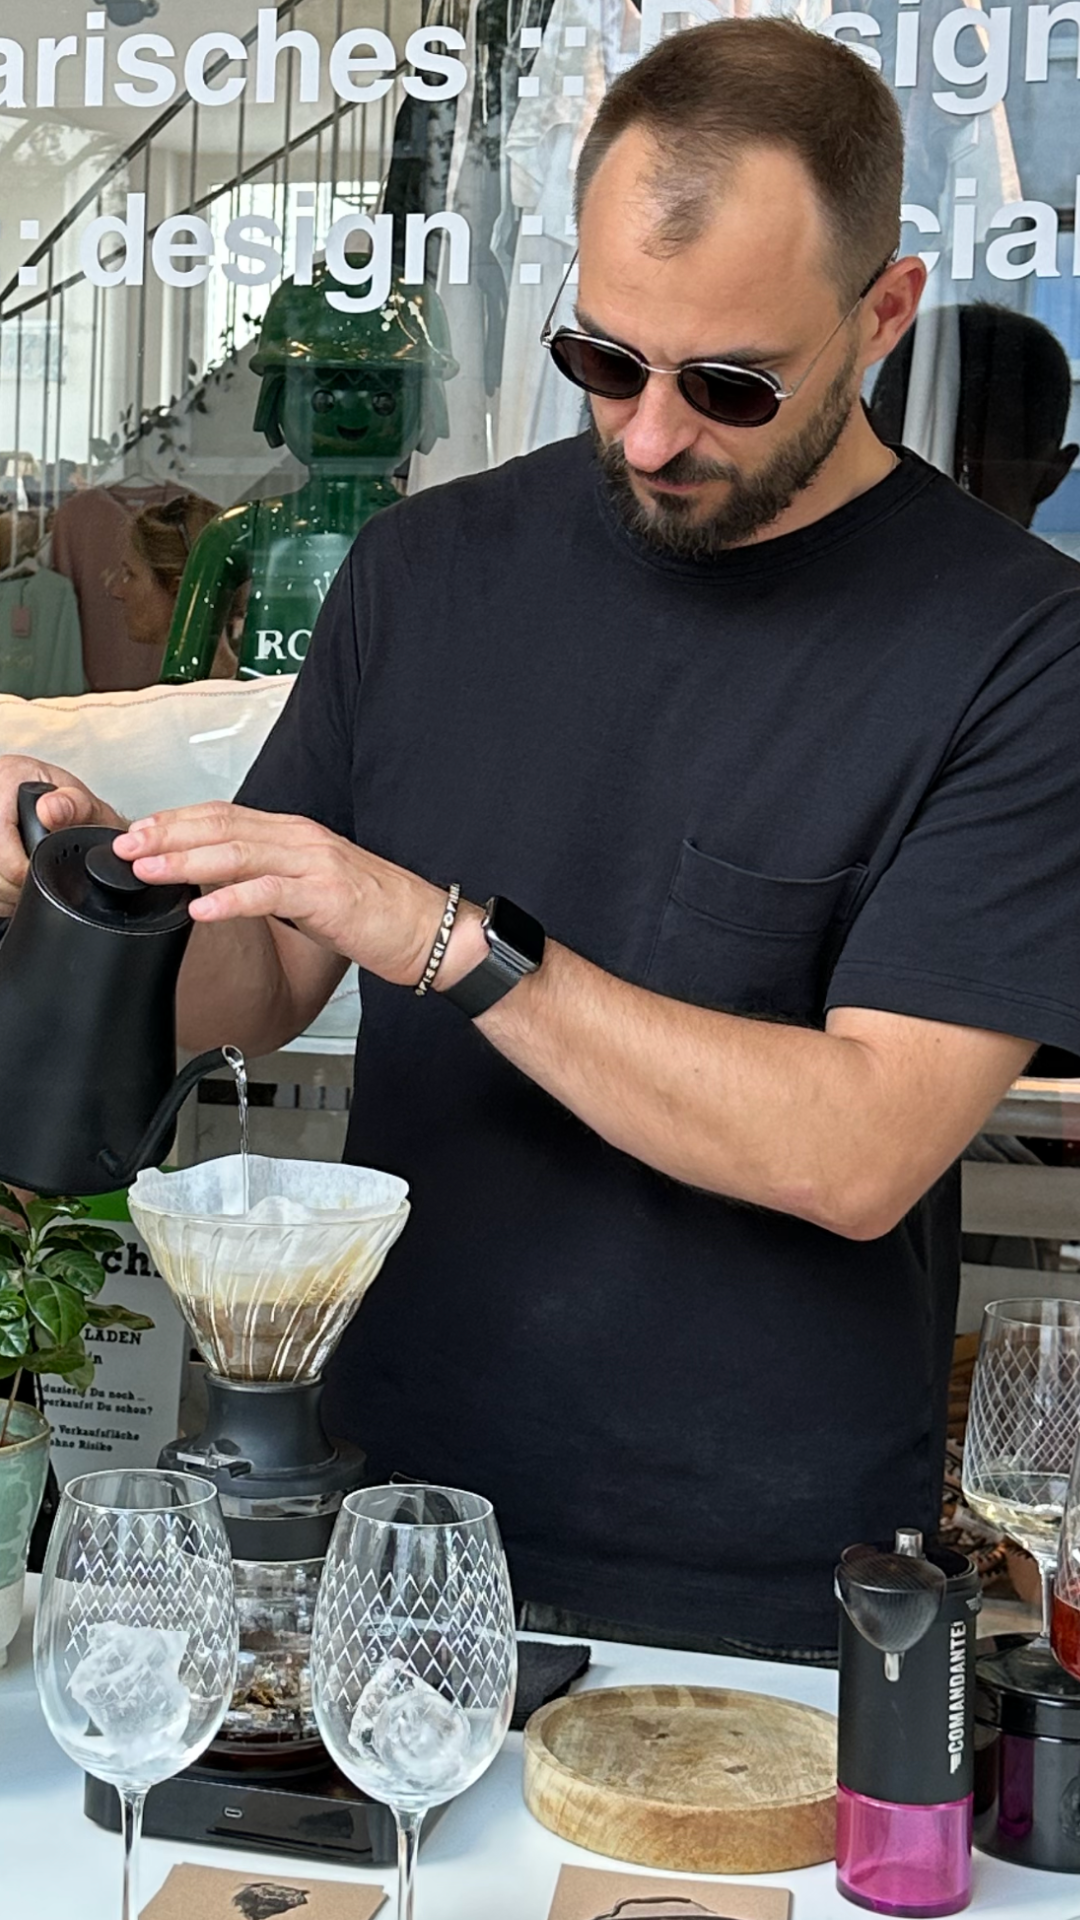 André Näder presenting at the 'NO-Filter Coffee Event' in central Frankfurt, passionately sharing the pour-over technique with the engaged farmersvaluefirst community.